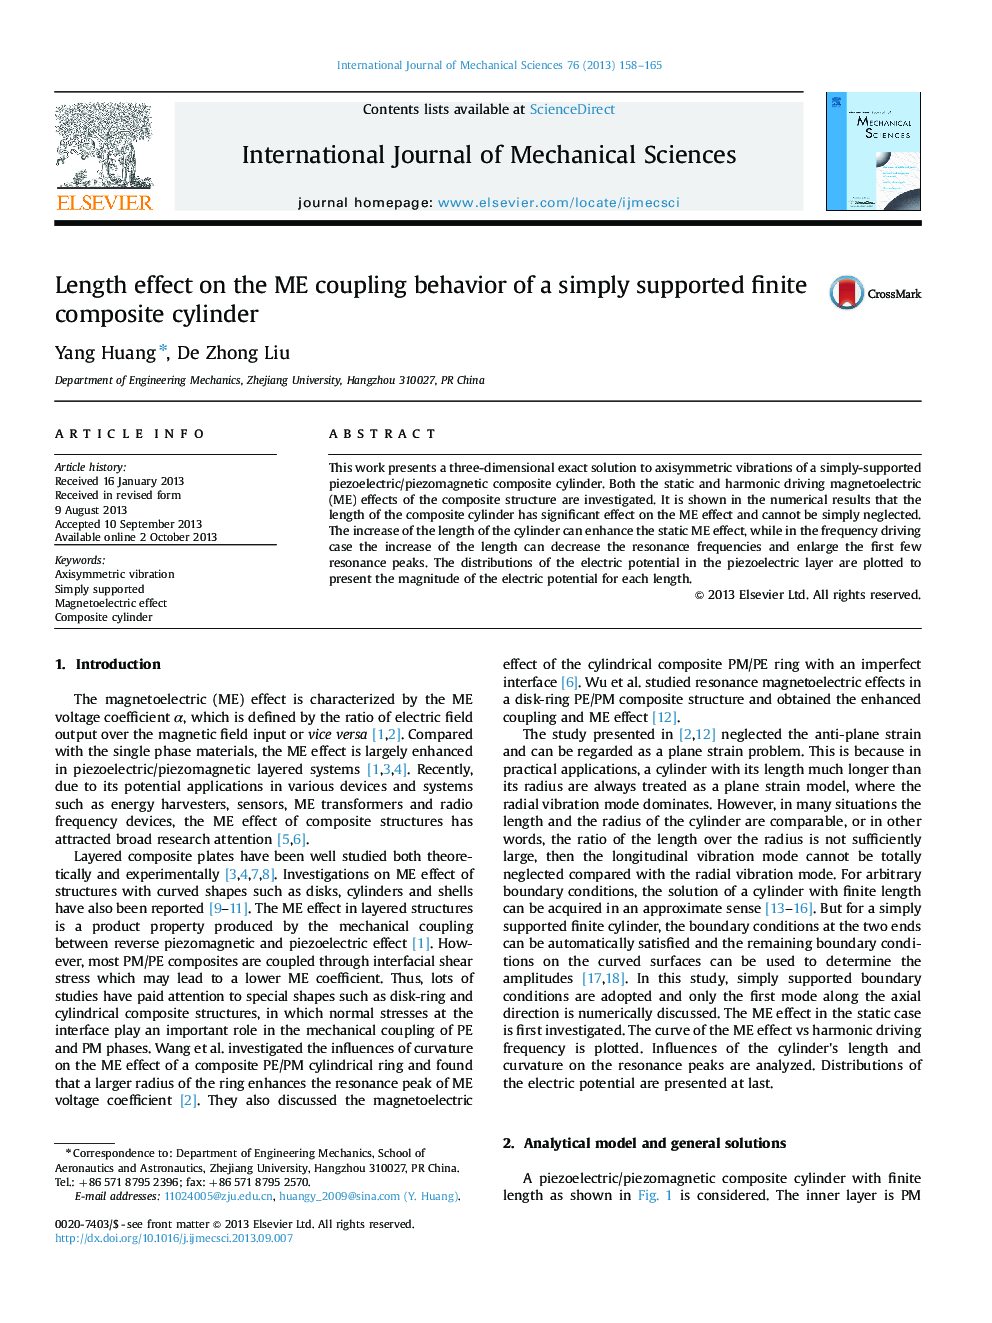 Length effect on the ME coupling behavior of a simply supported finite composite cylinder